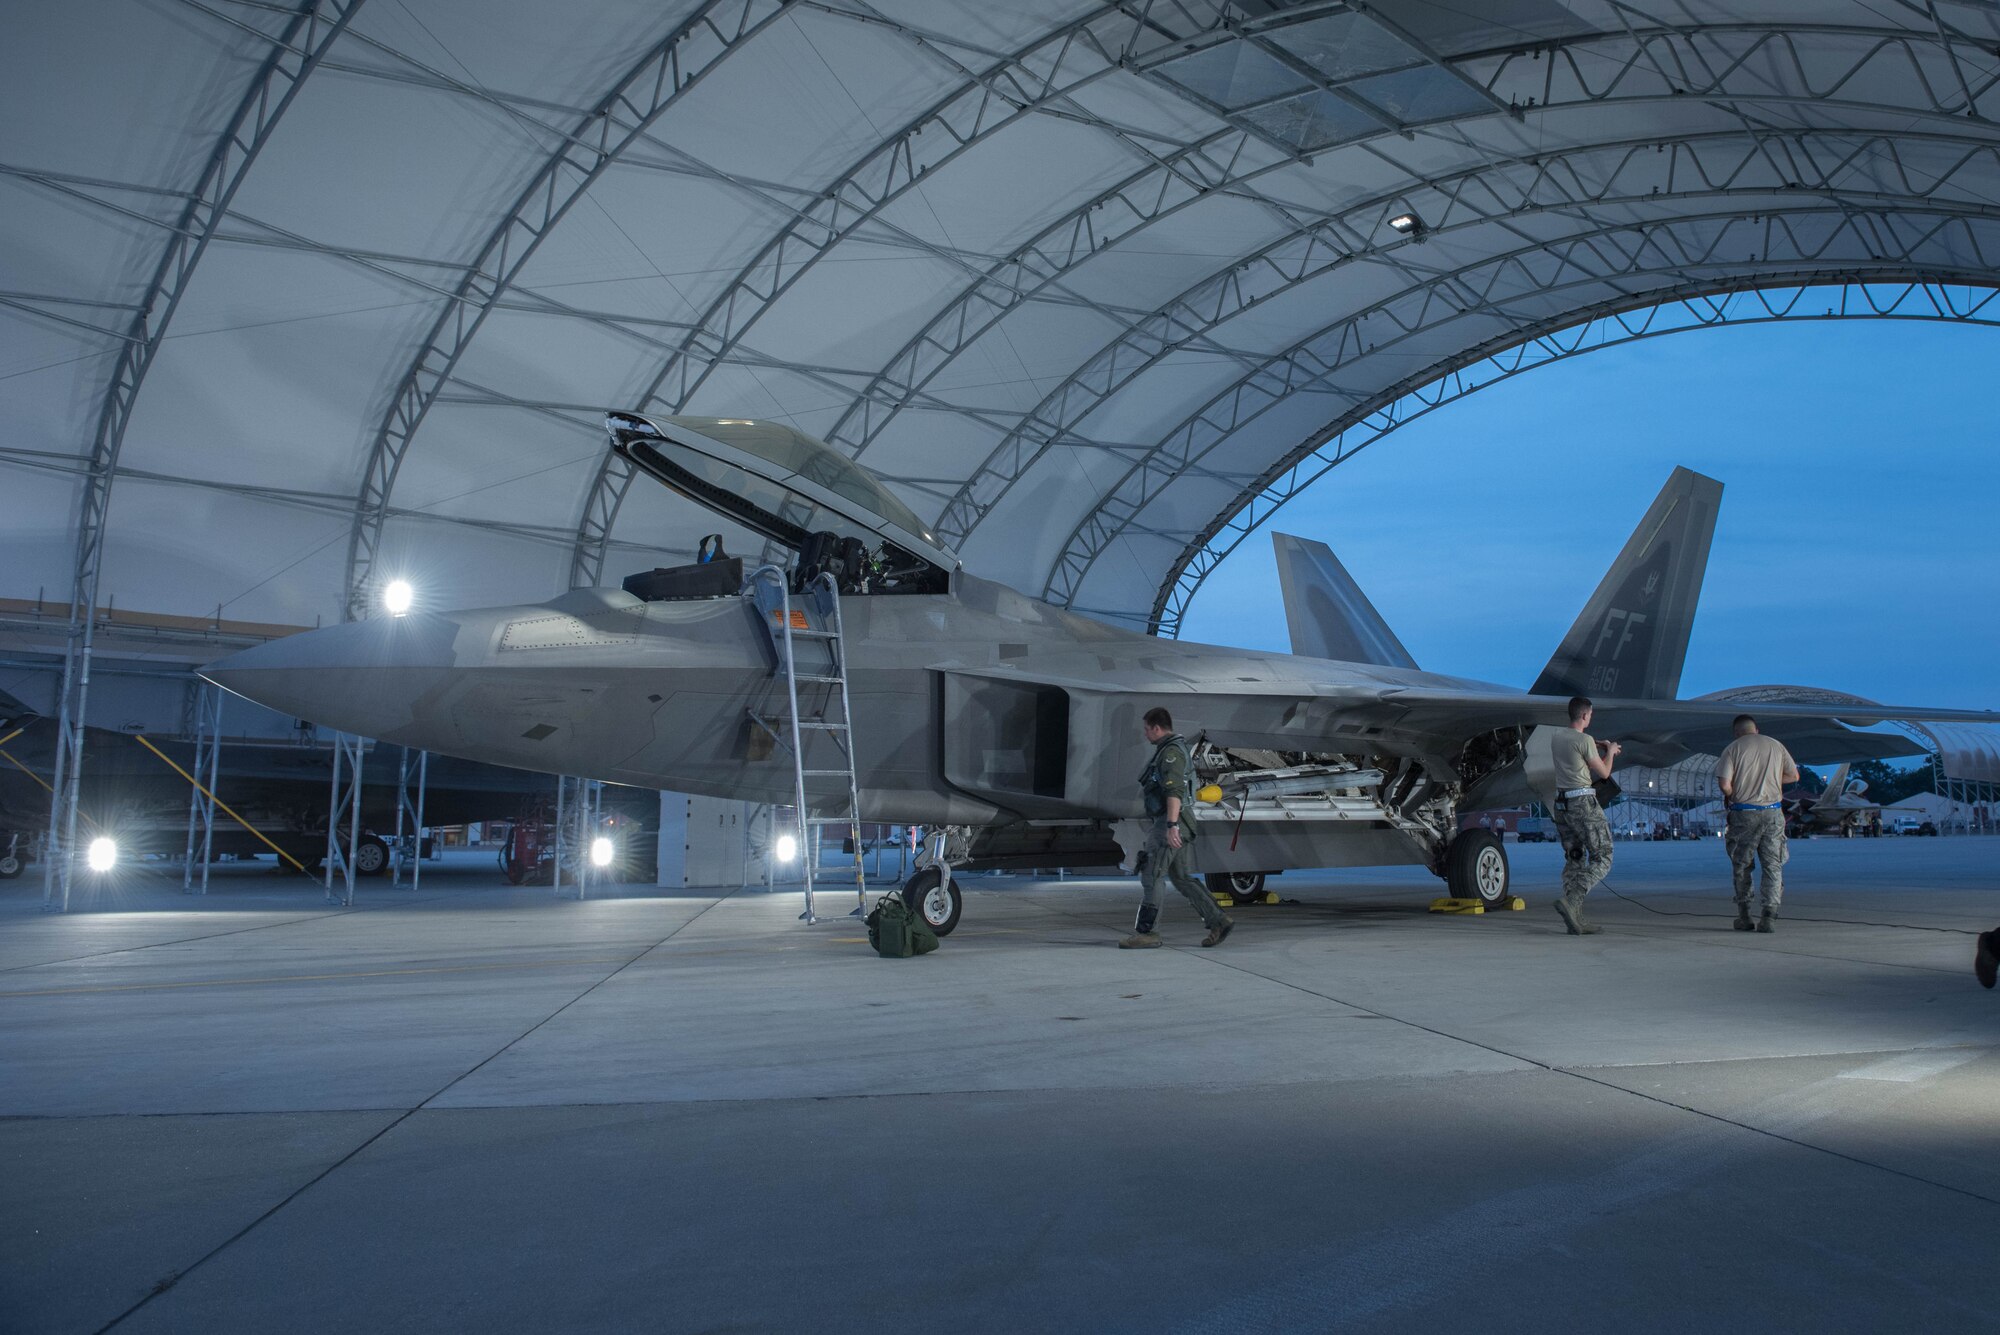 A U.S. Air Force F-22 Raptor pilot assigned to the 1st Fighter Wing, completes pre-flight inspections, during night operations at Joint Base Langley-Eustis, Va., July 11, 2017. Night operations allow pilots to maximize combat readiness in the 1st FW's lines of effort and maintain night navigation proficiency. (U.S. Air Force photo/Staff Sgt. Carlin Leslie)